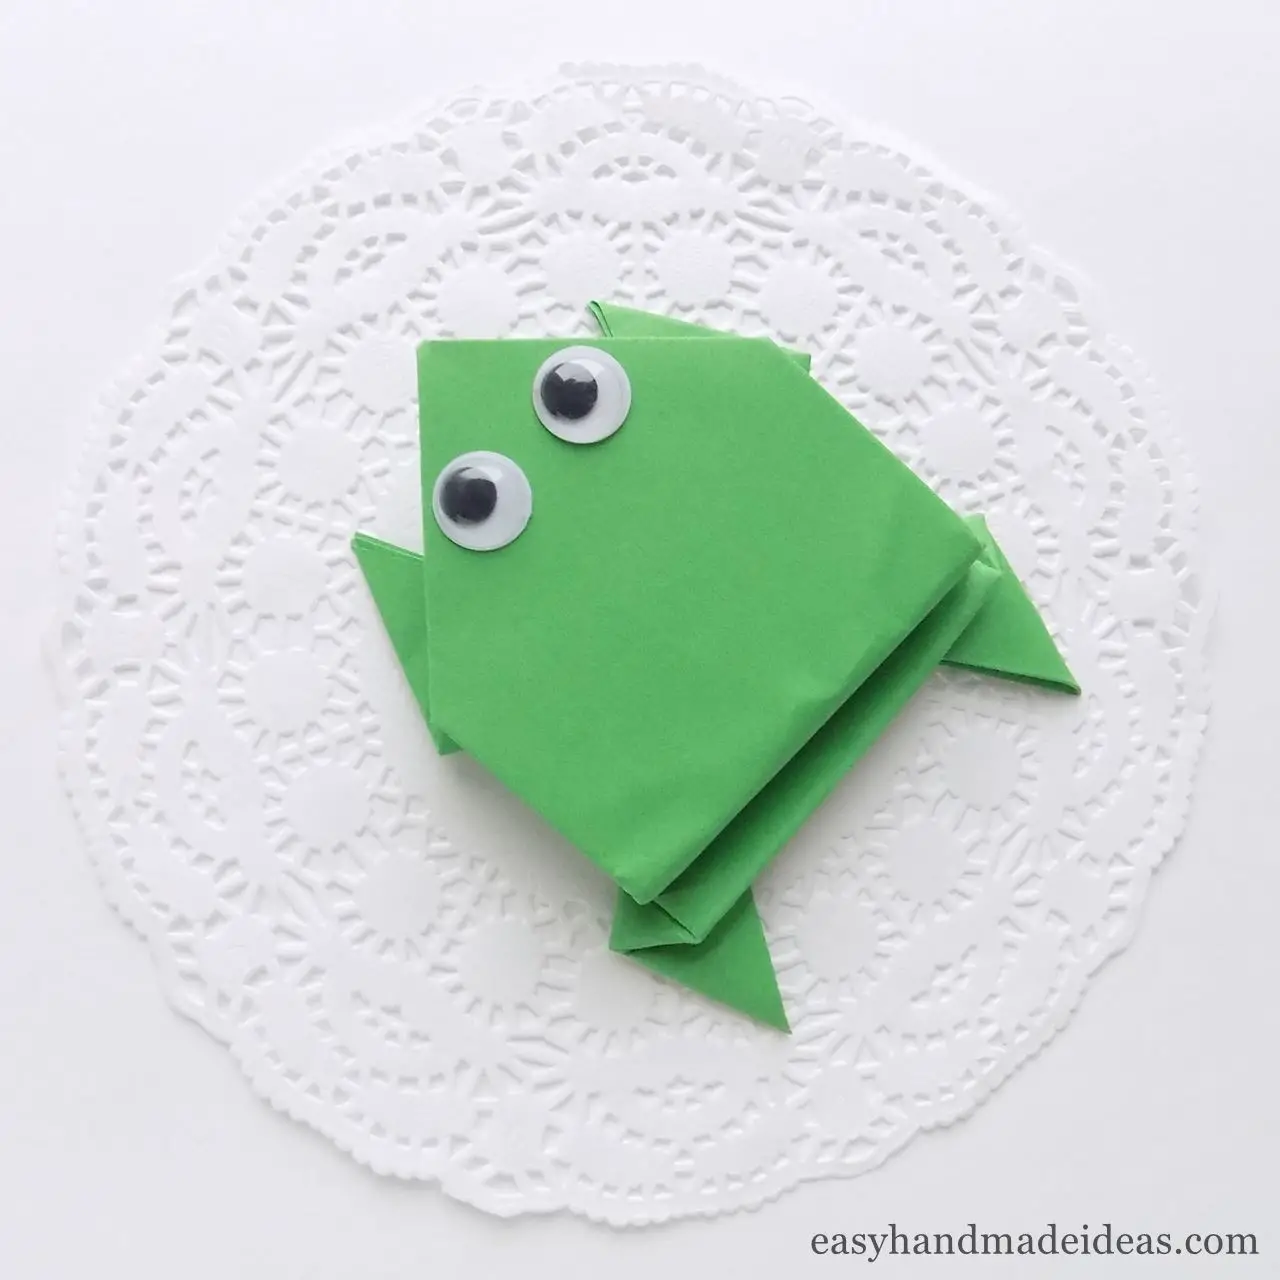 How to make an origami jumping frog